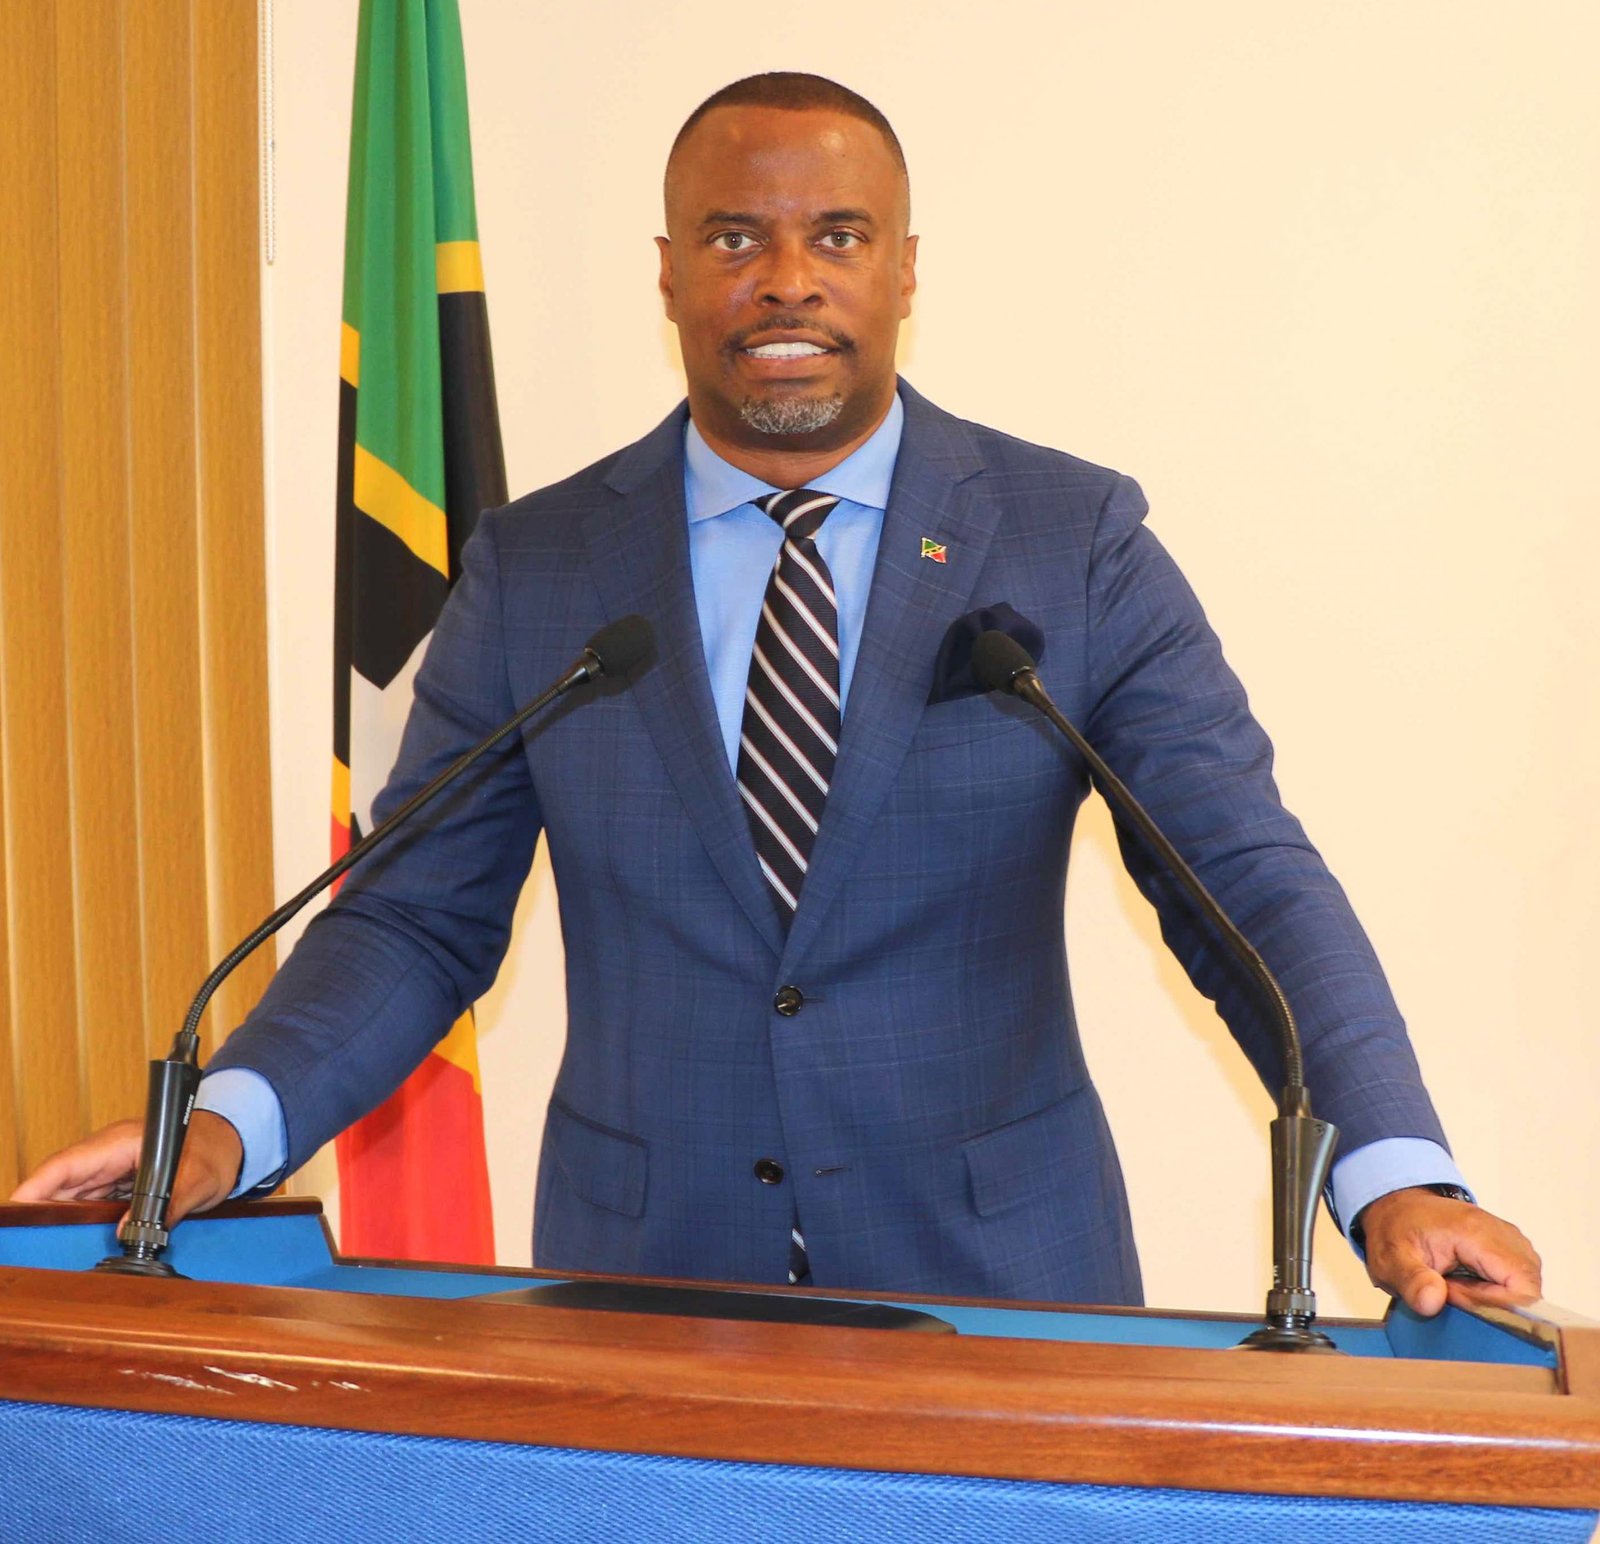 You are currently viewing Premier Brantley is “Cautiously Optimistic” about 2022 Economic Outlook for Nevis